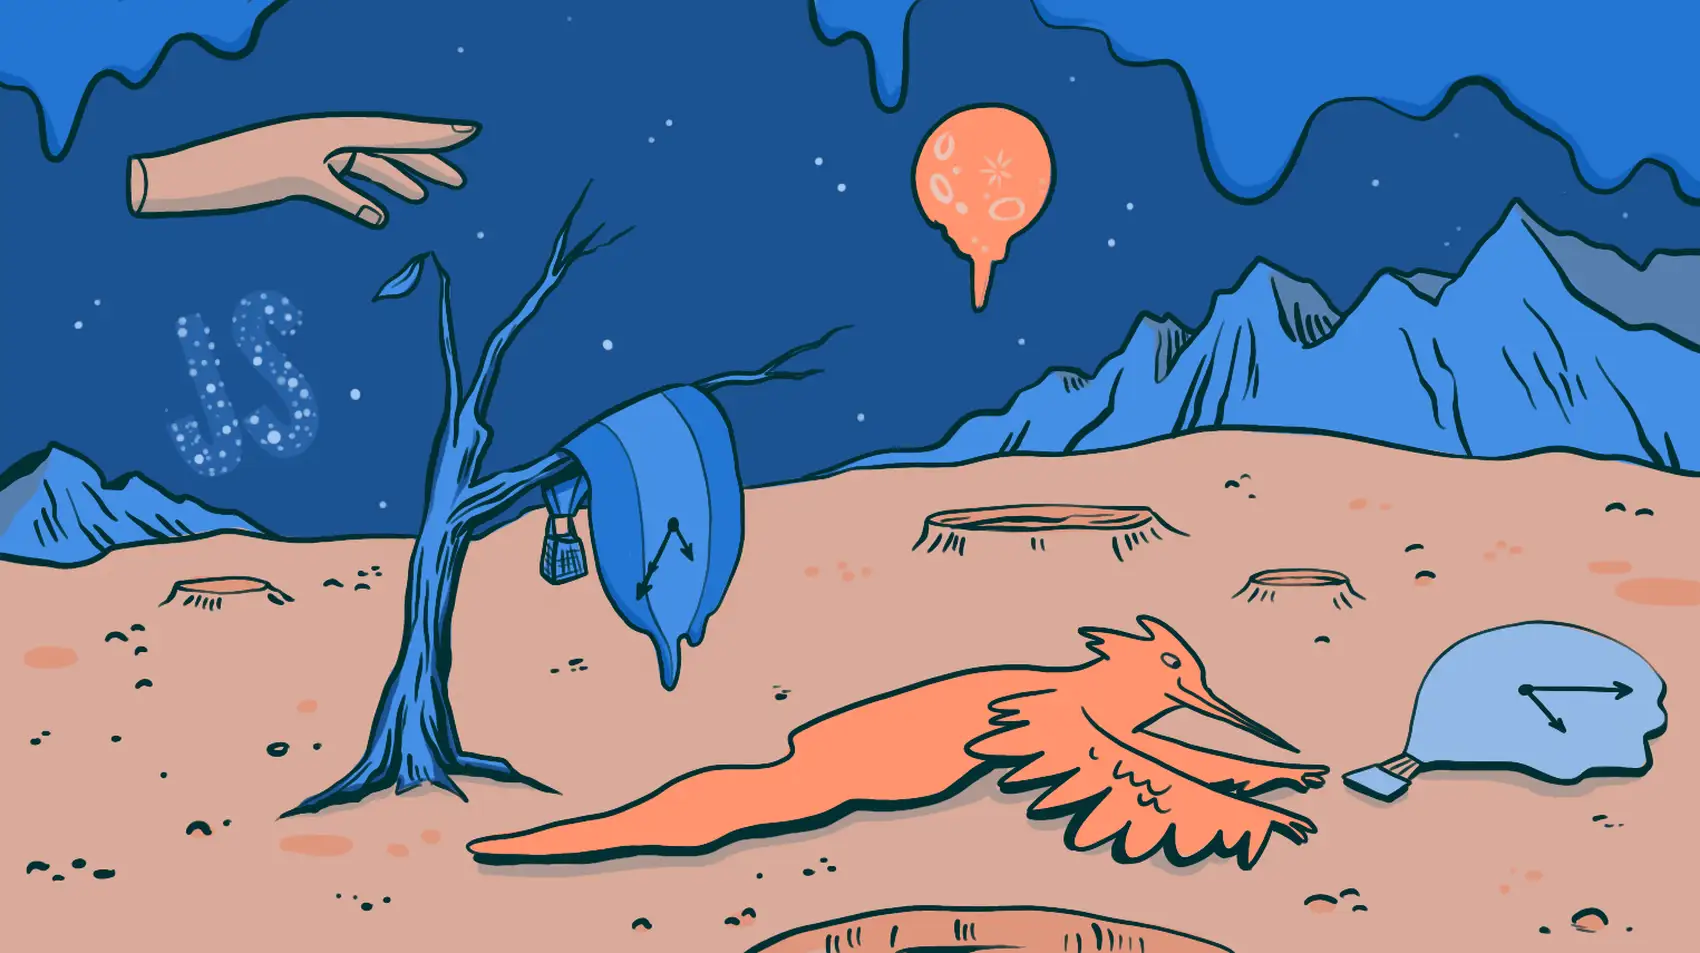 A landscape vaguely inspired by Salvador Dali's The Persistence of Memory  including a melted balloon clock, craters, a disembodied hand, mountains, and a JS logo in the sky